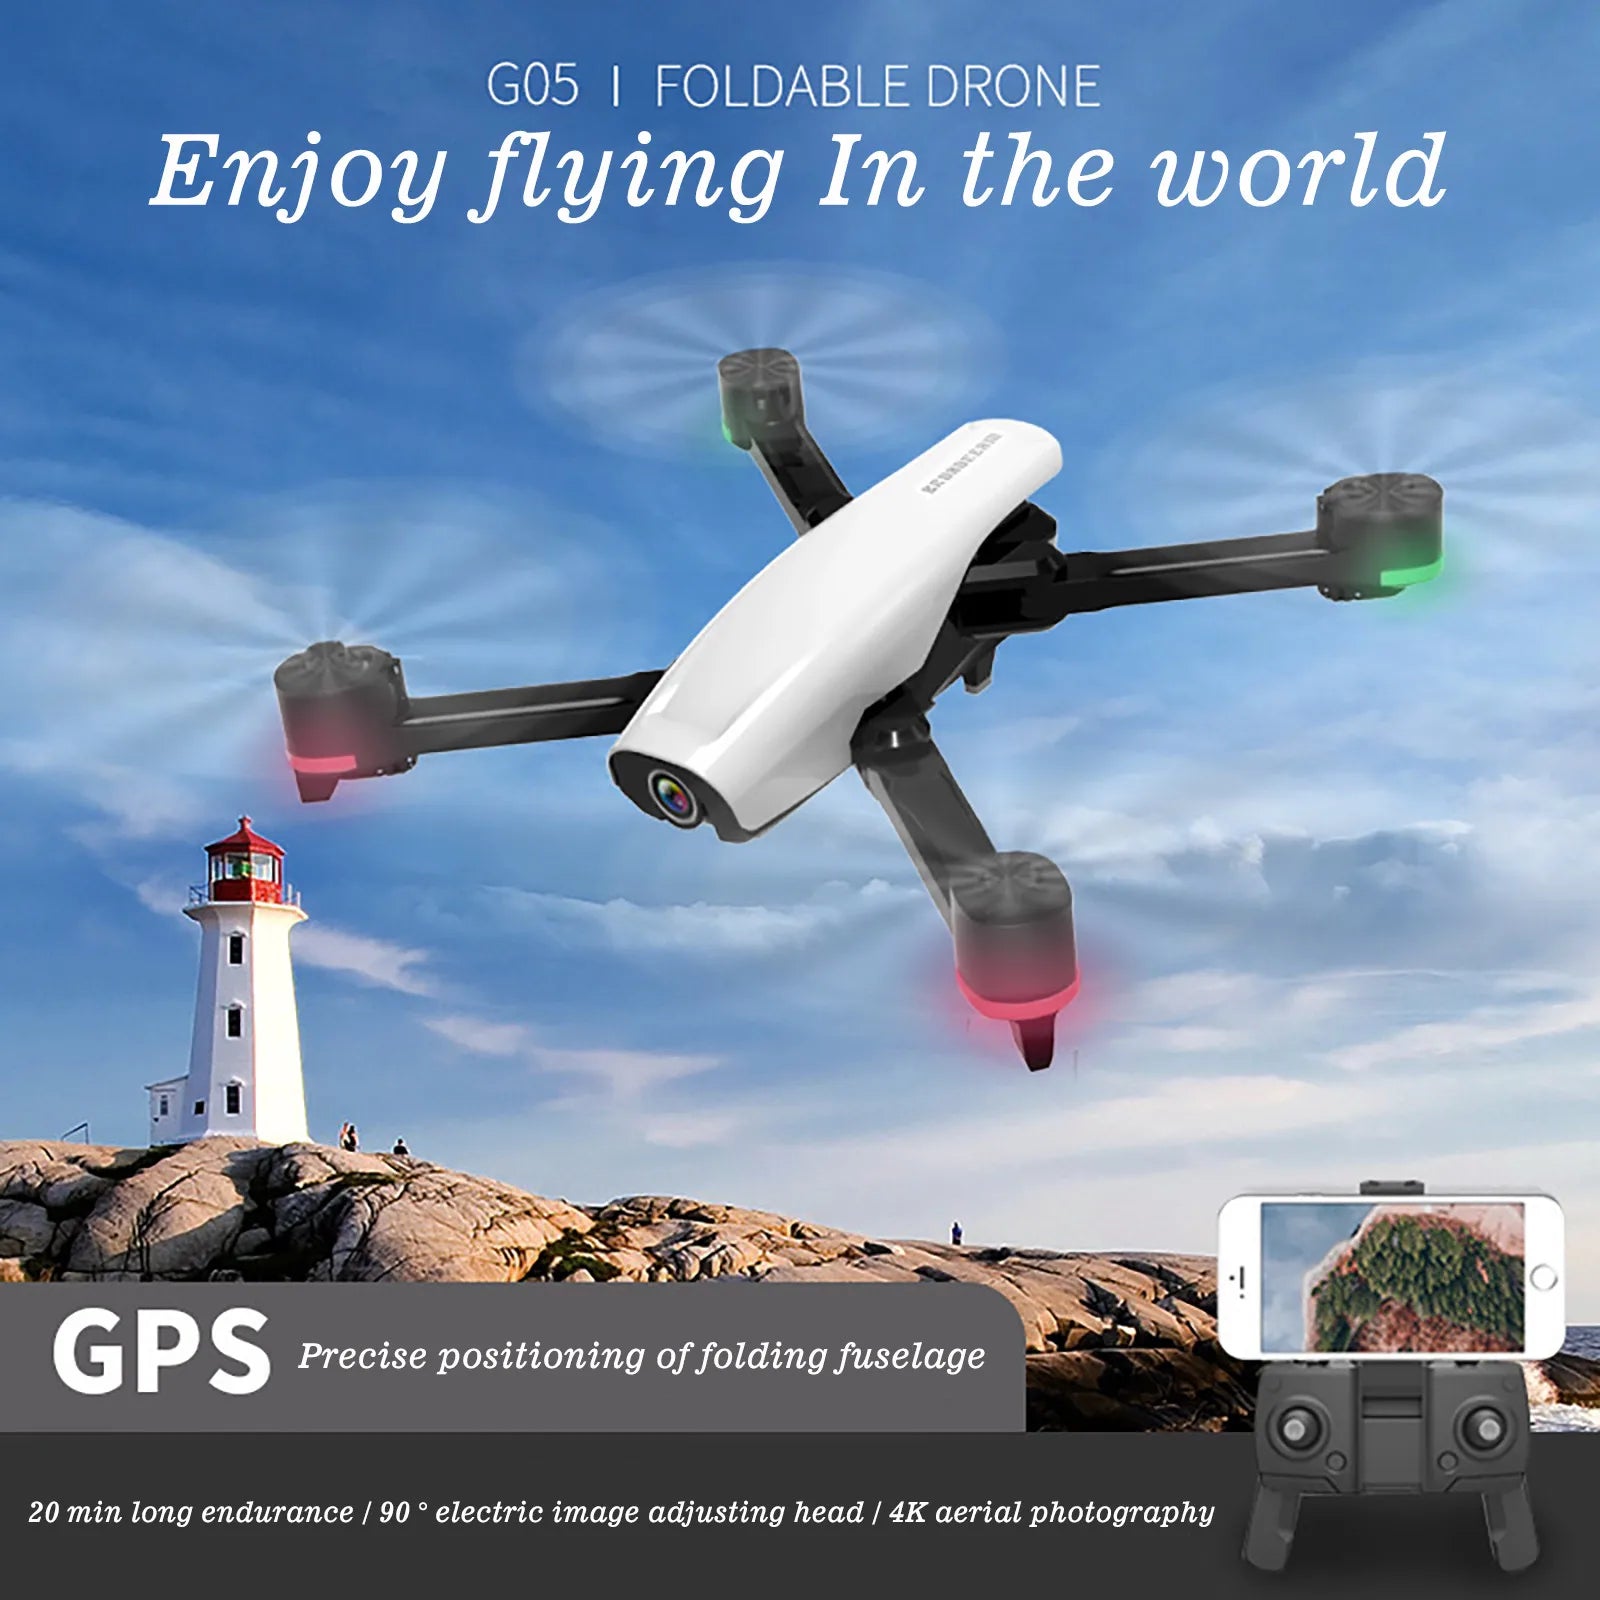 G05 Drone, G05 1 FOLDABLE DRONE Enjoy flying In the world GPS Precise